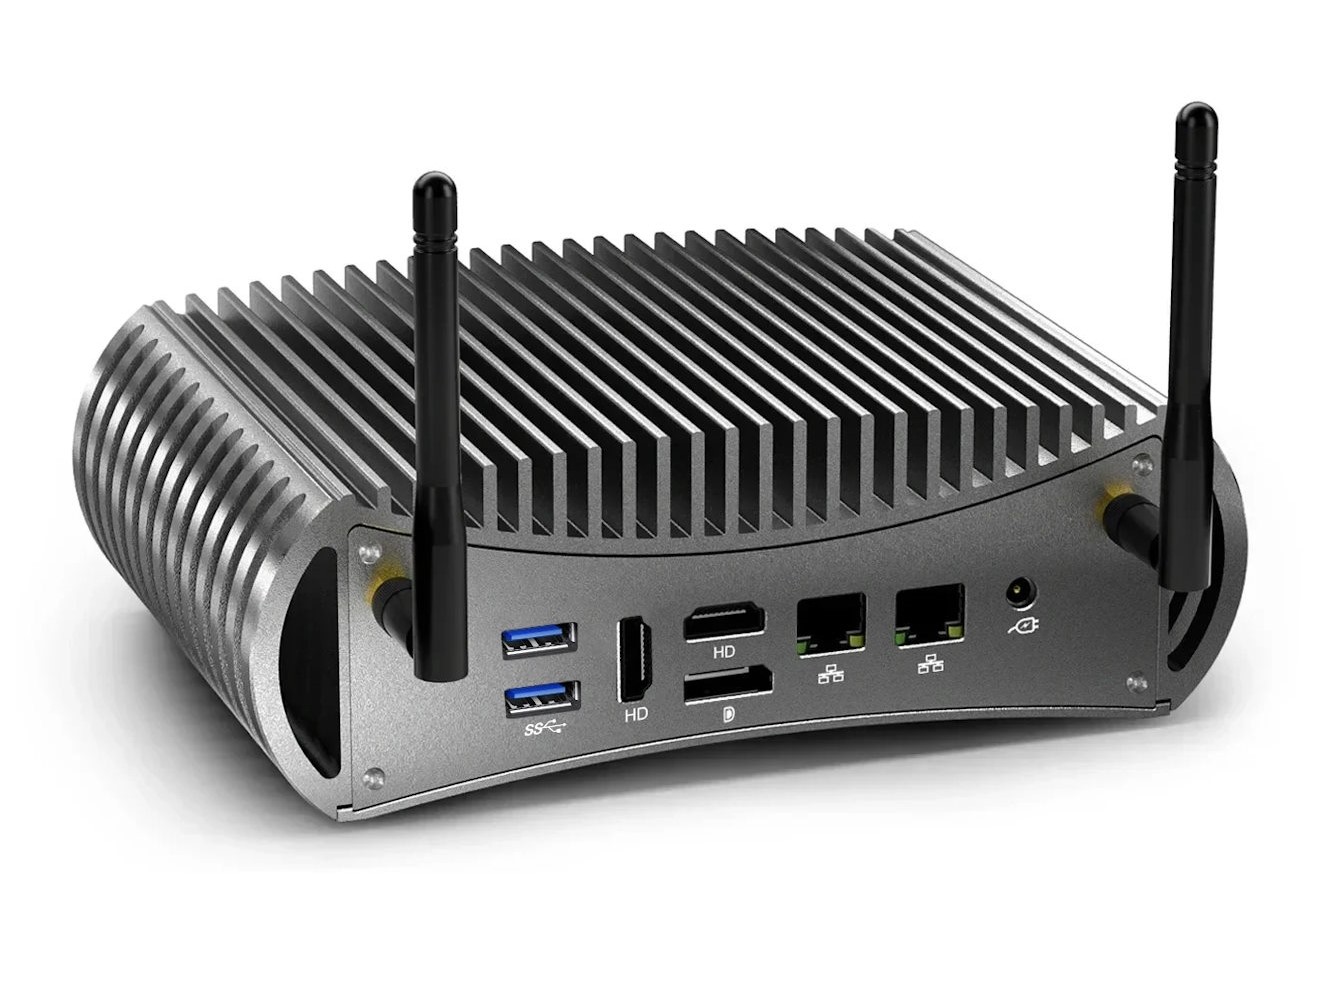 Chatreey TK12-F: New mini PC offers Core i7 power in passively cooled housing and many ports - NotebookCheck.net News